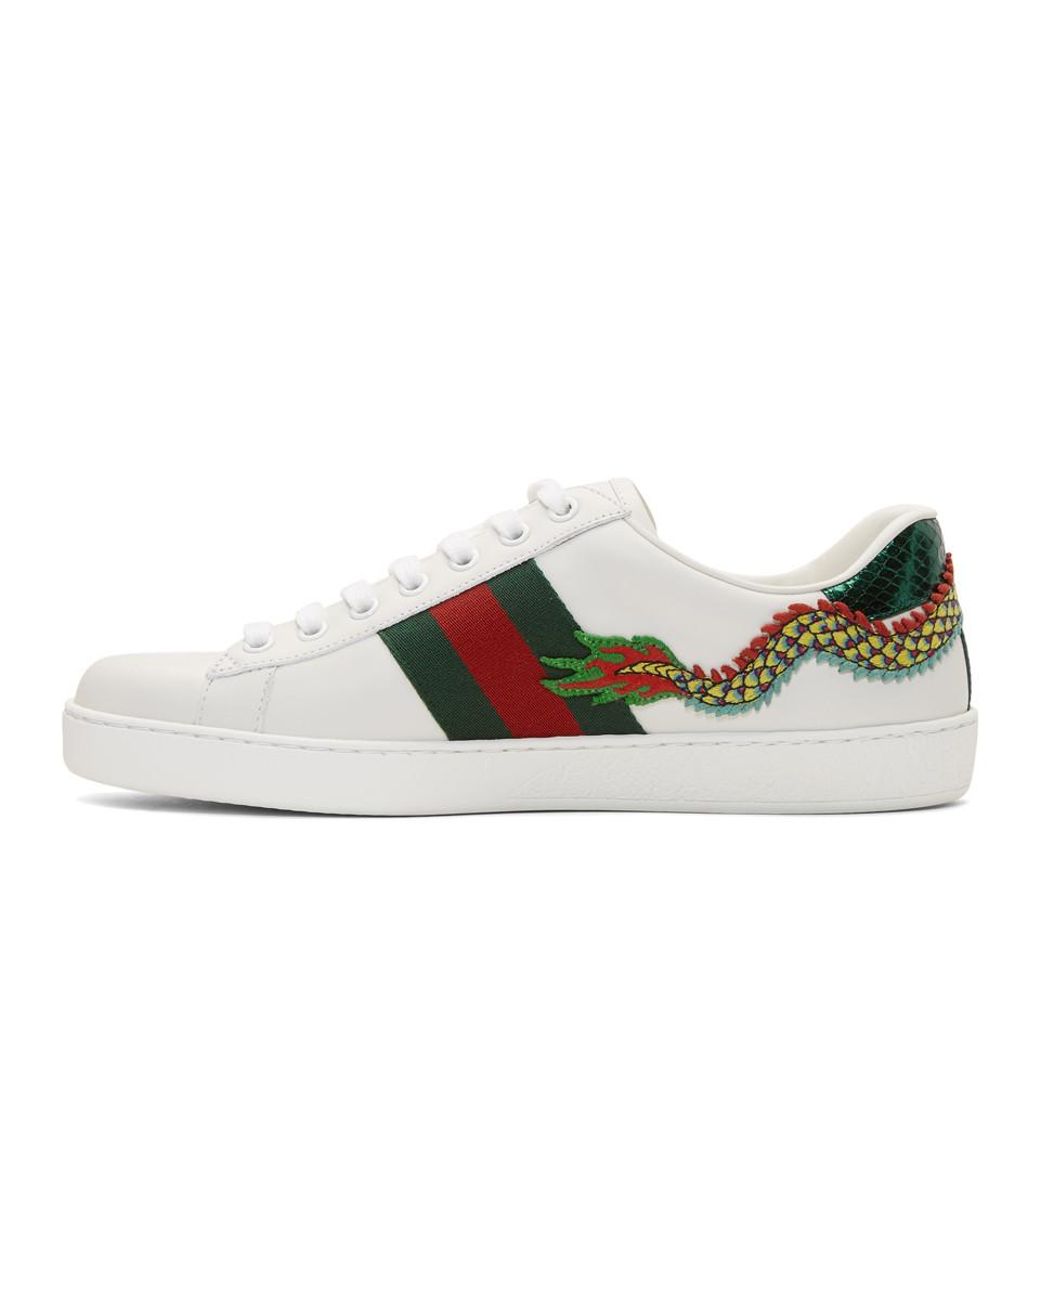 Gucci White Dragon Ace Sneakers for Men Lyst